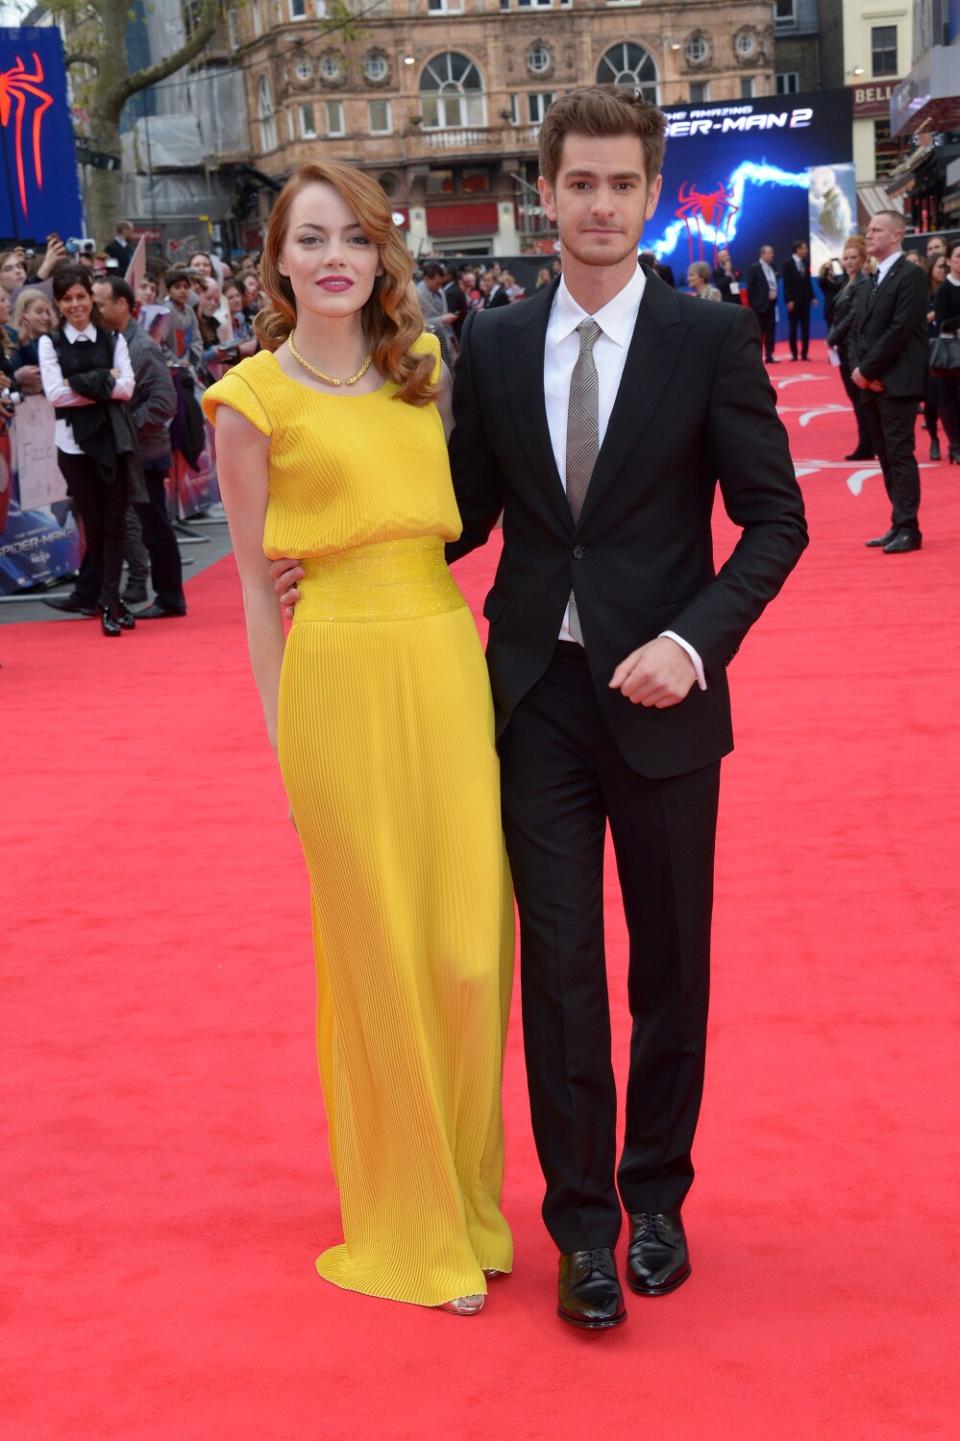 A man and woman arrive at a movie premiere